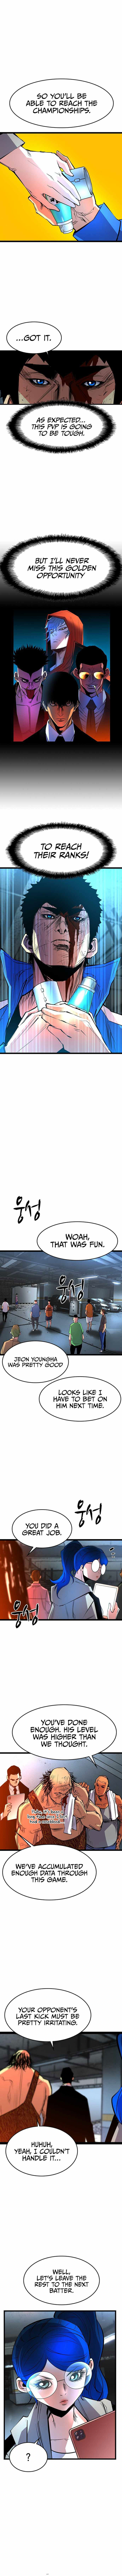 Hanlim Gym Chapter 83 page 7